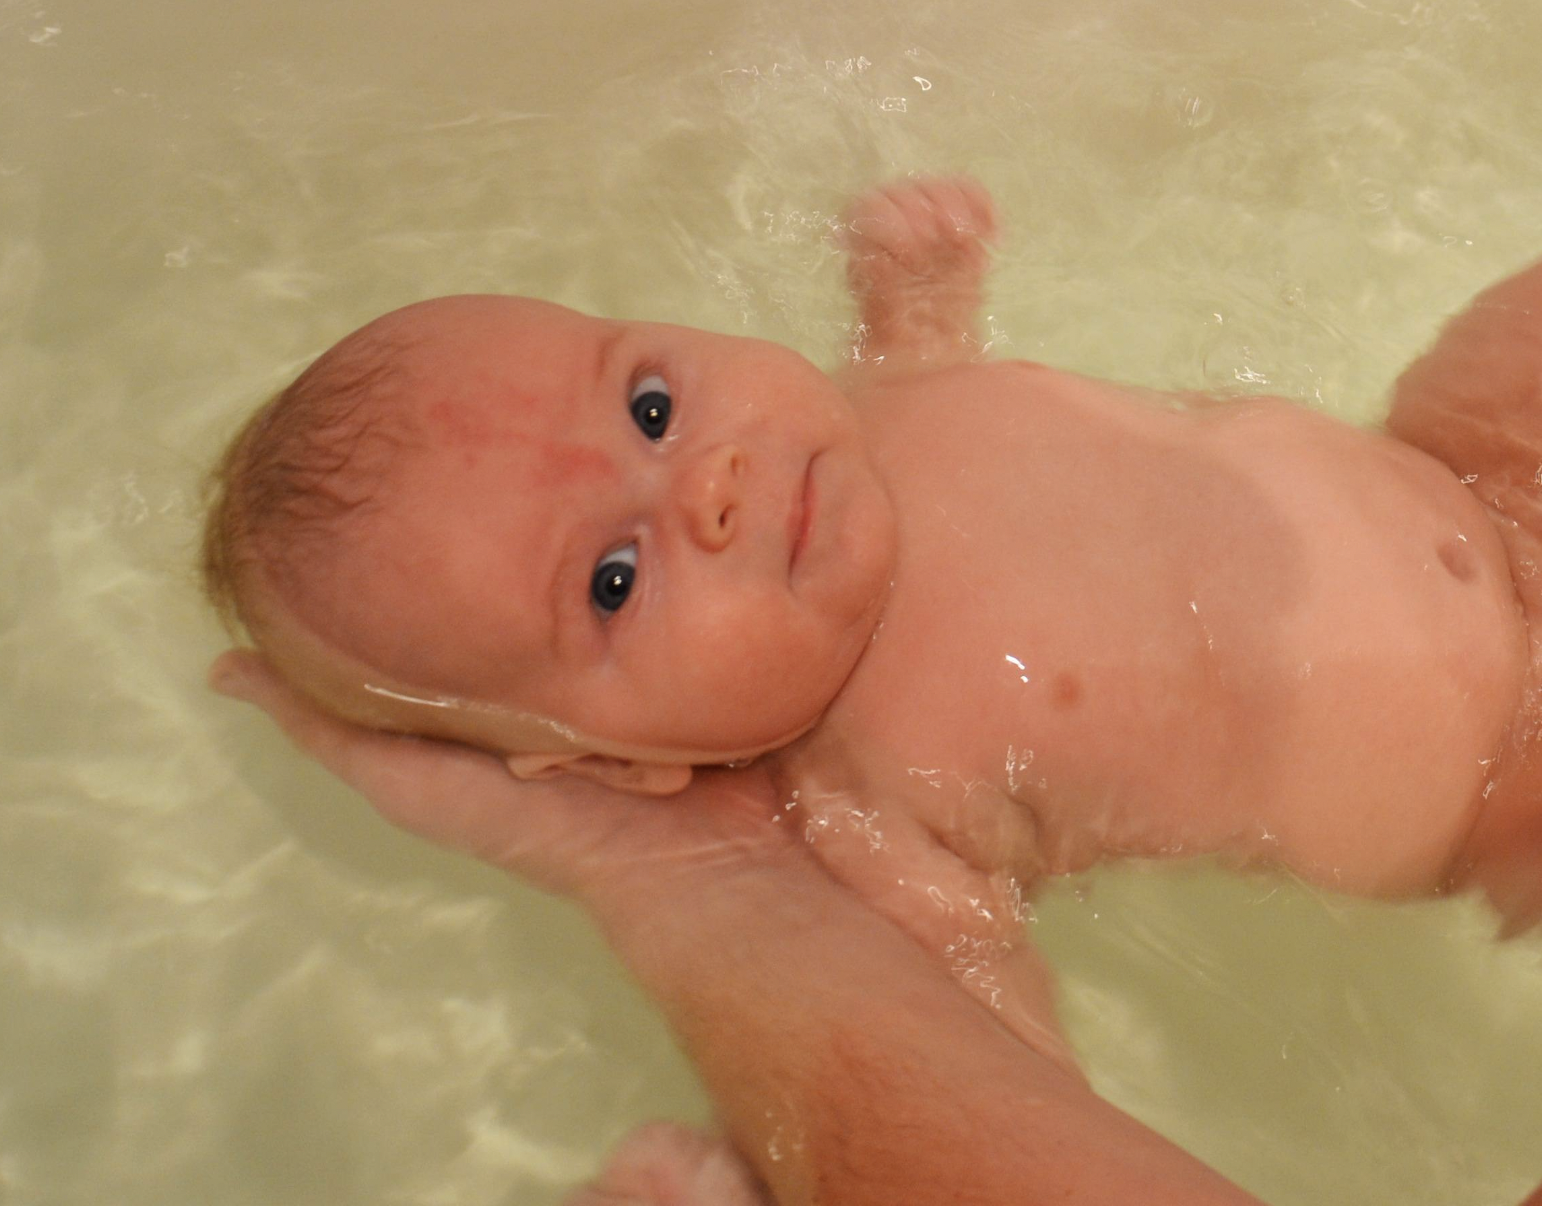 The baby is bathed in a bathtub | Source: Flickr